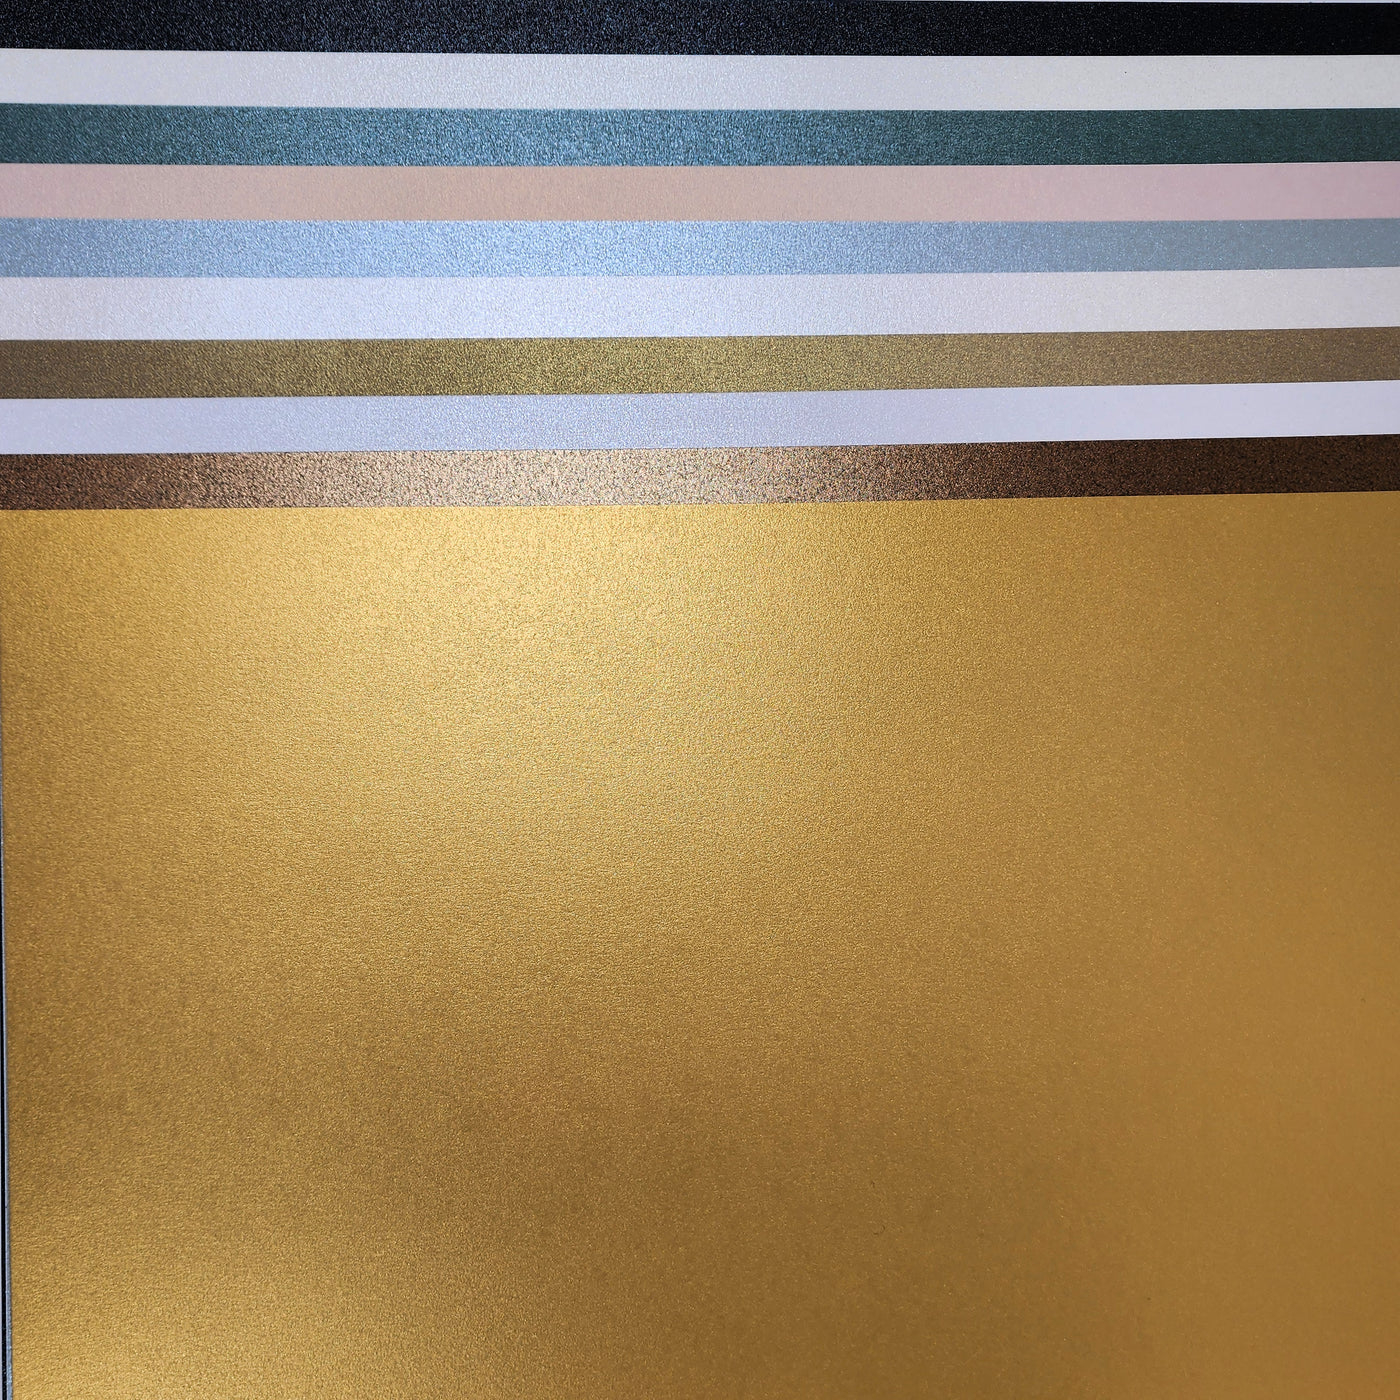 SIRIO COMPLETE ASSORTMENT PACK - 12x12 Pearlescent Cardstock - Sirio Pearl